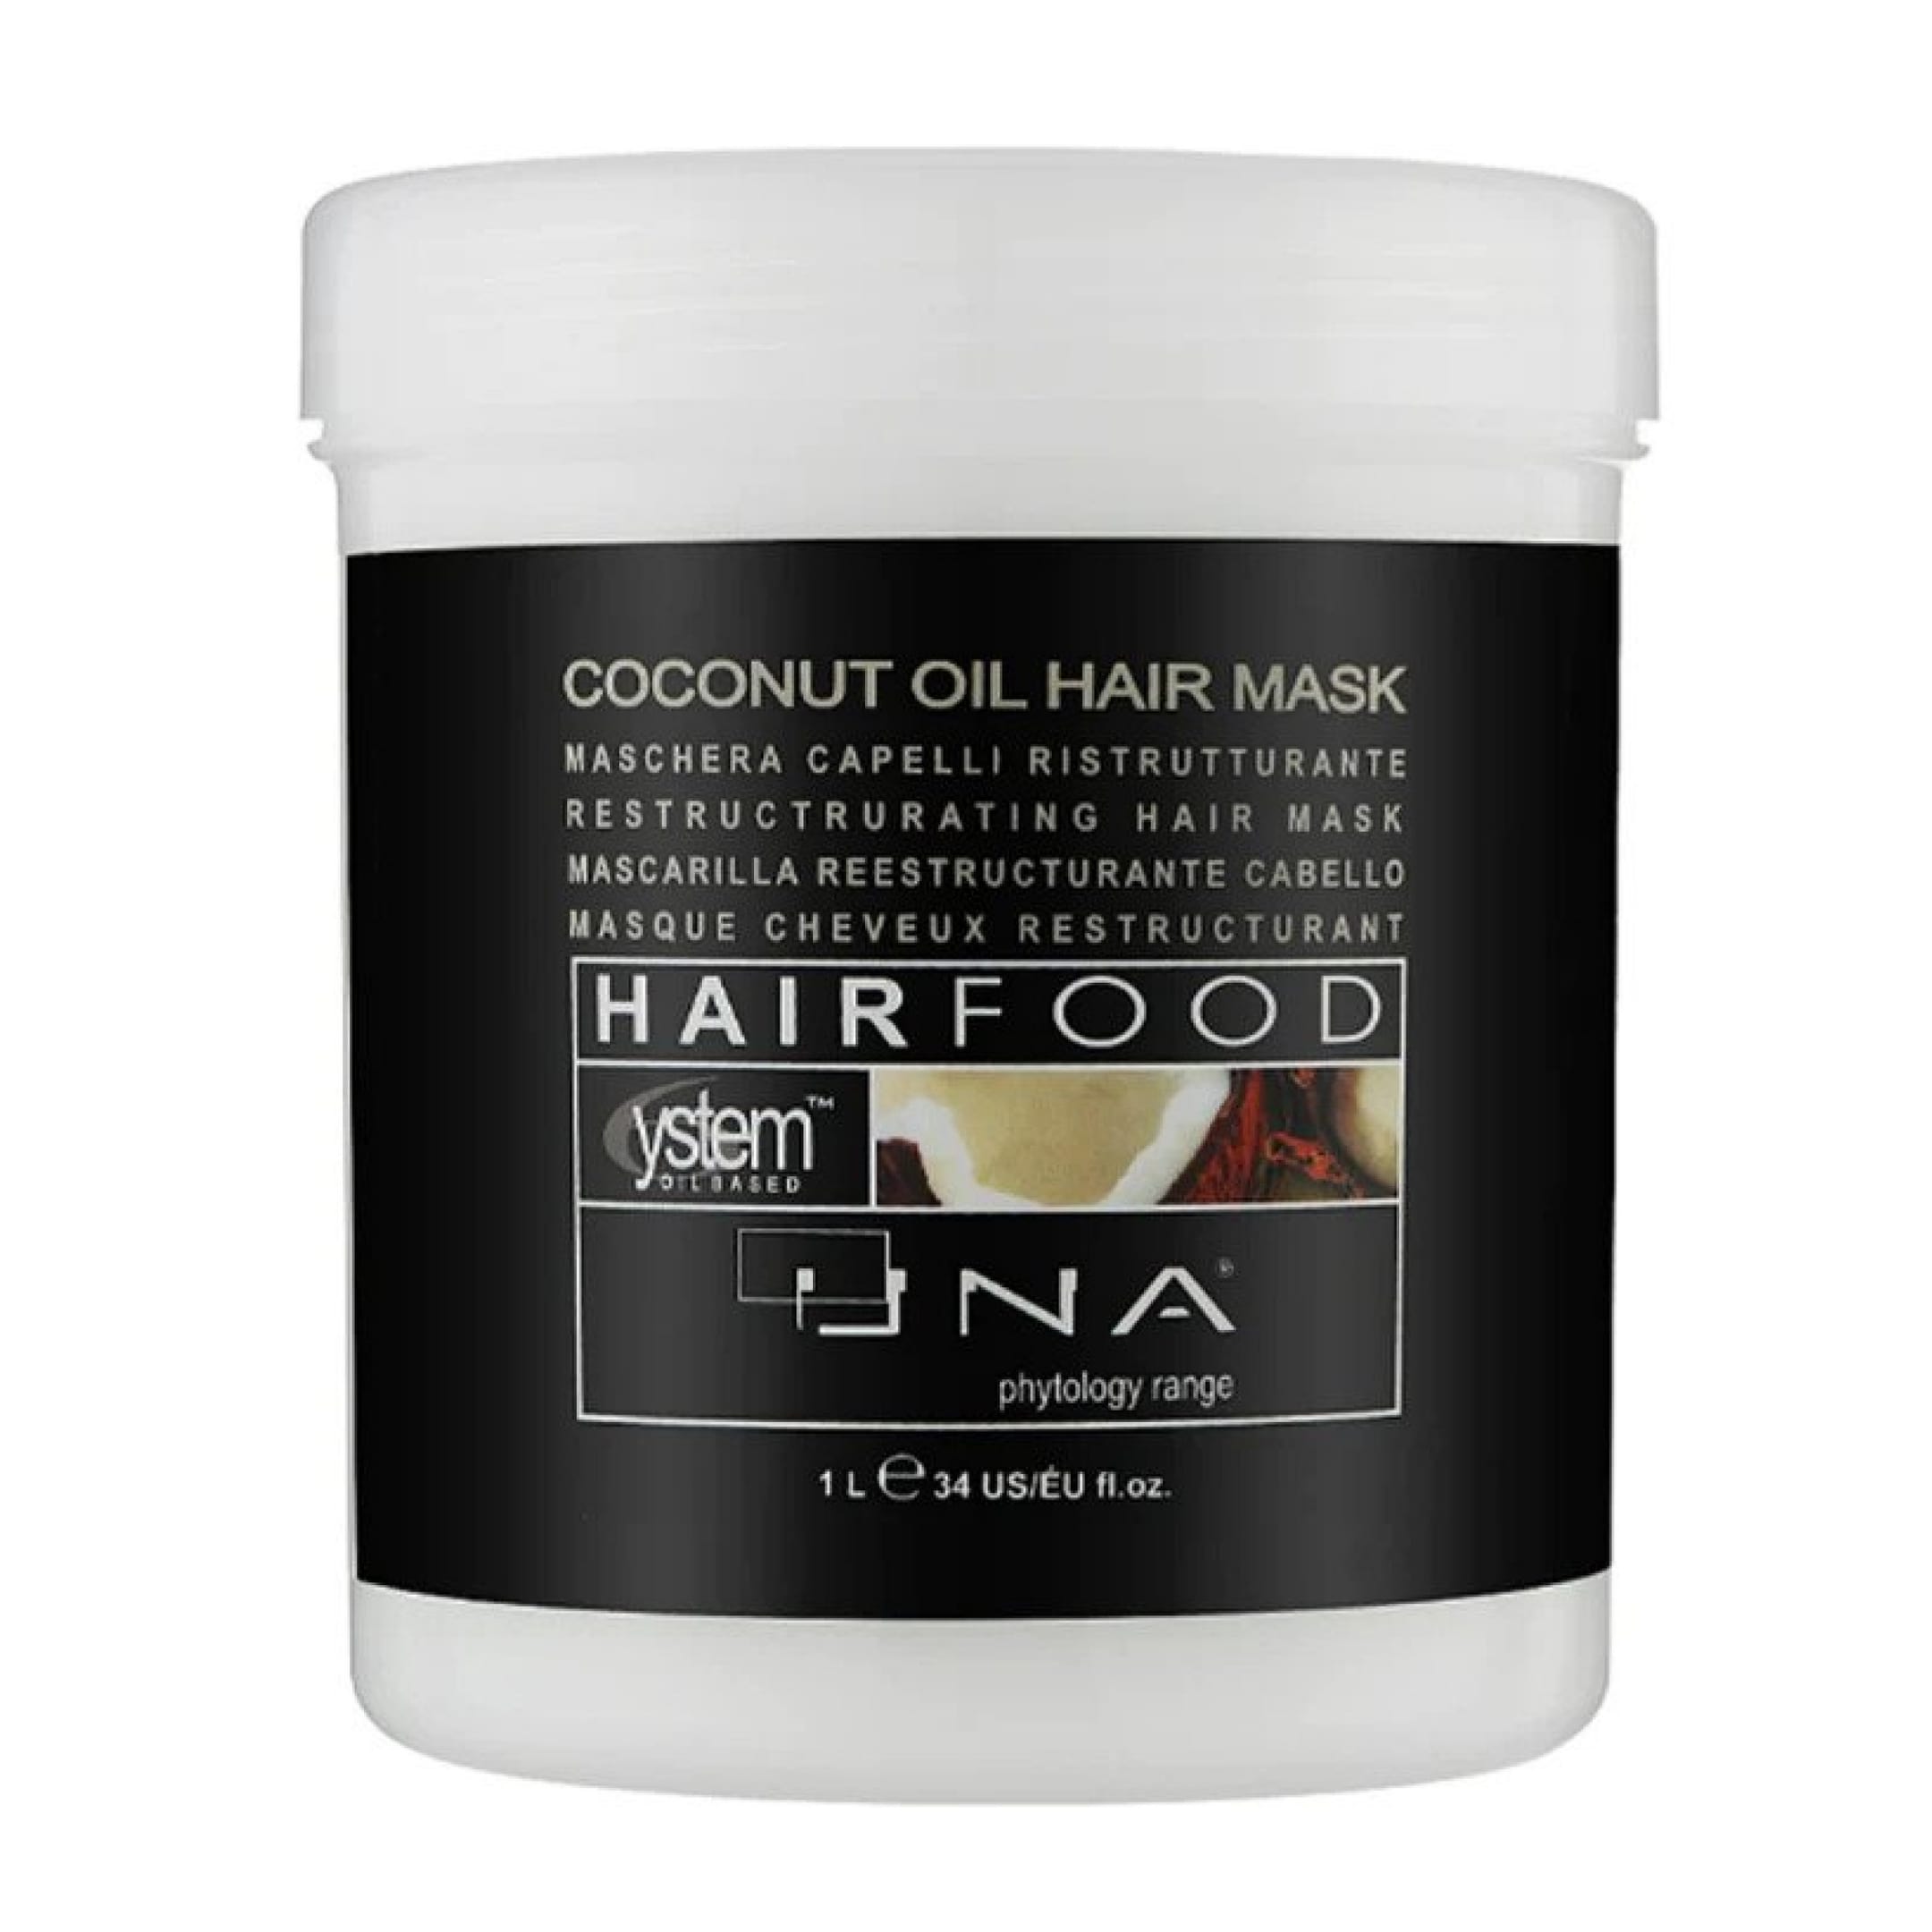 Nourishing coconut hair food infused with the richness of olive oil